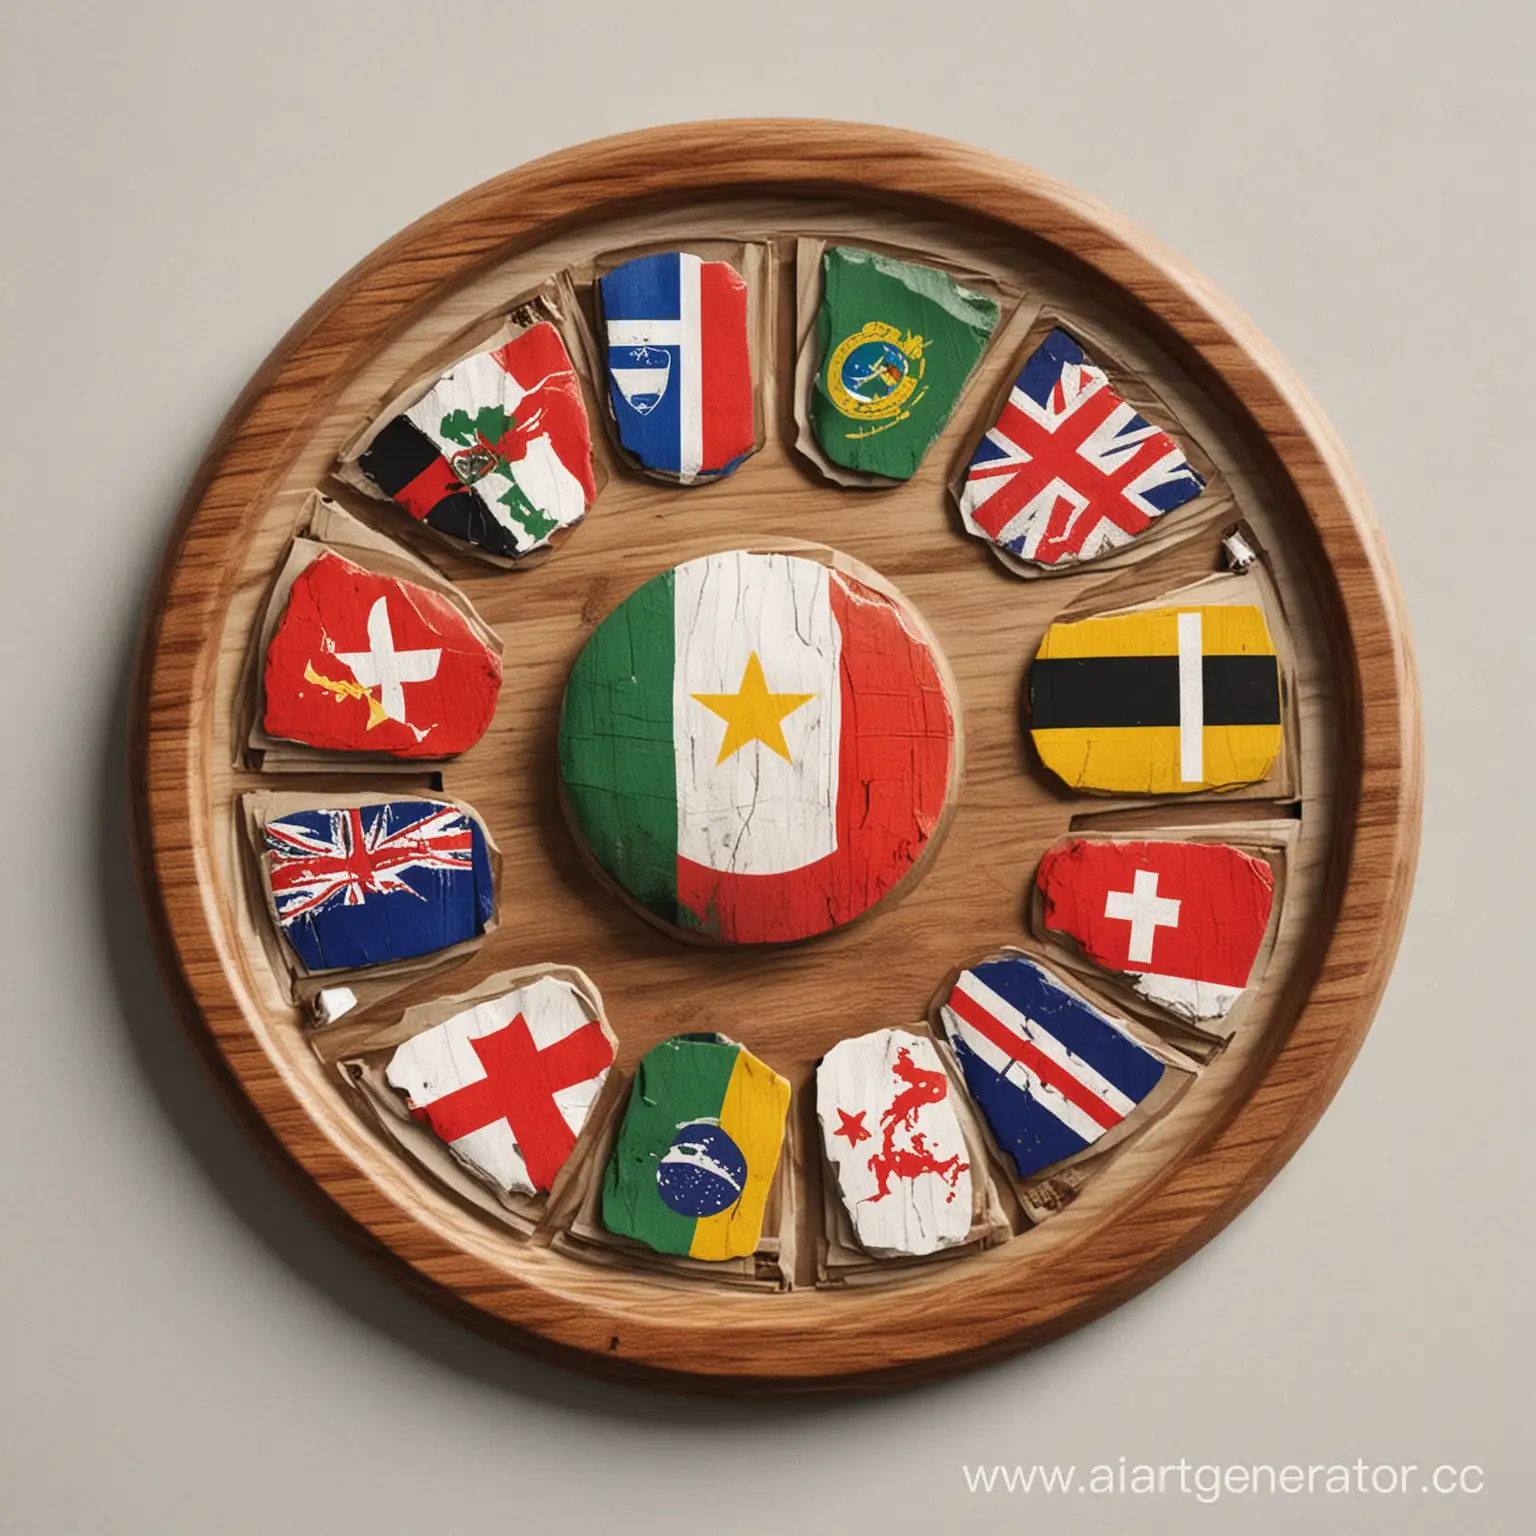 Circular-Military-Logo-Featuring-Flags-of-Six-Nations